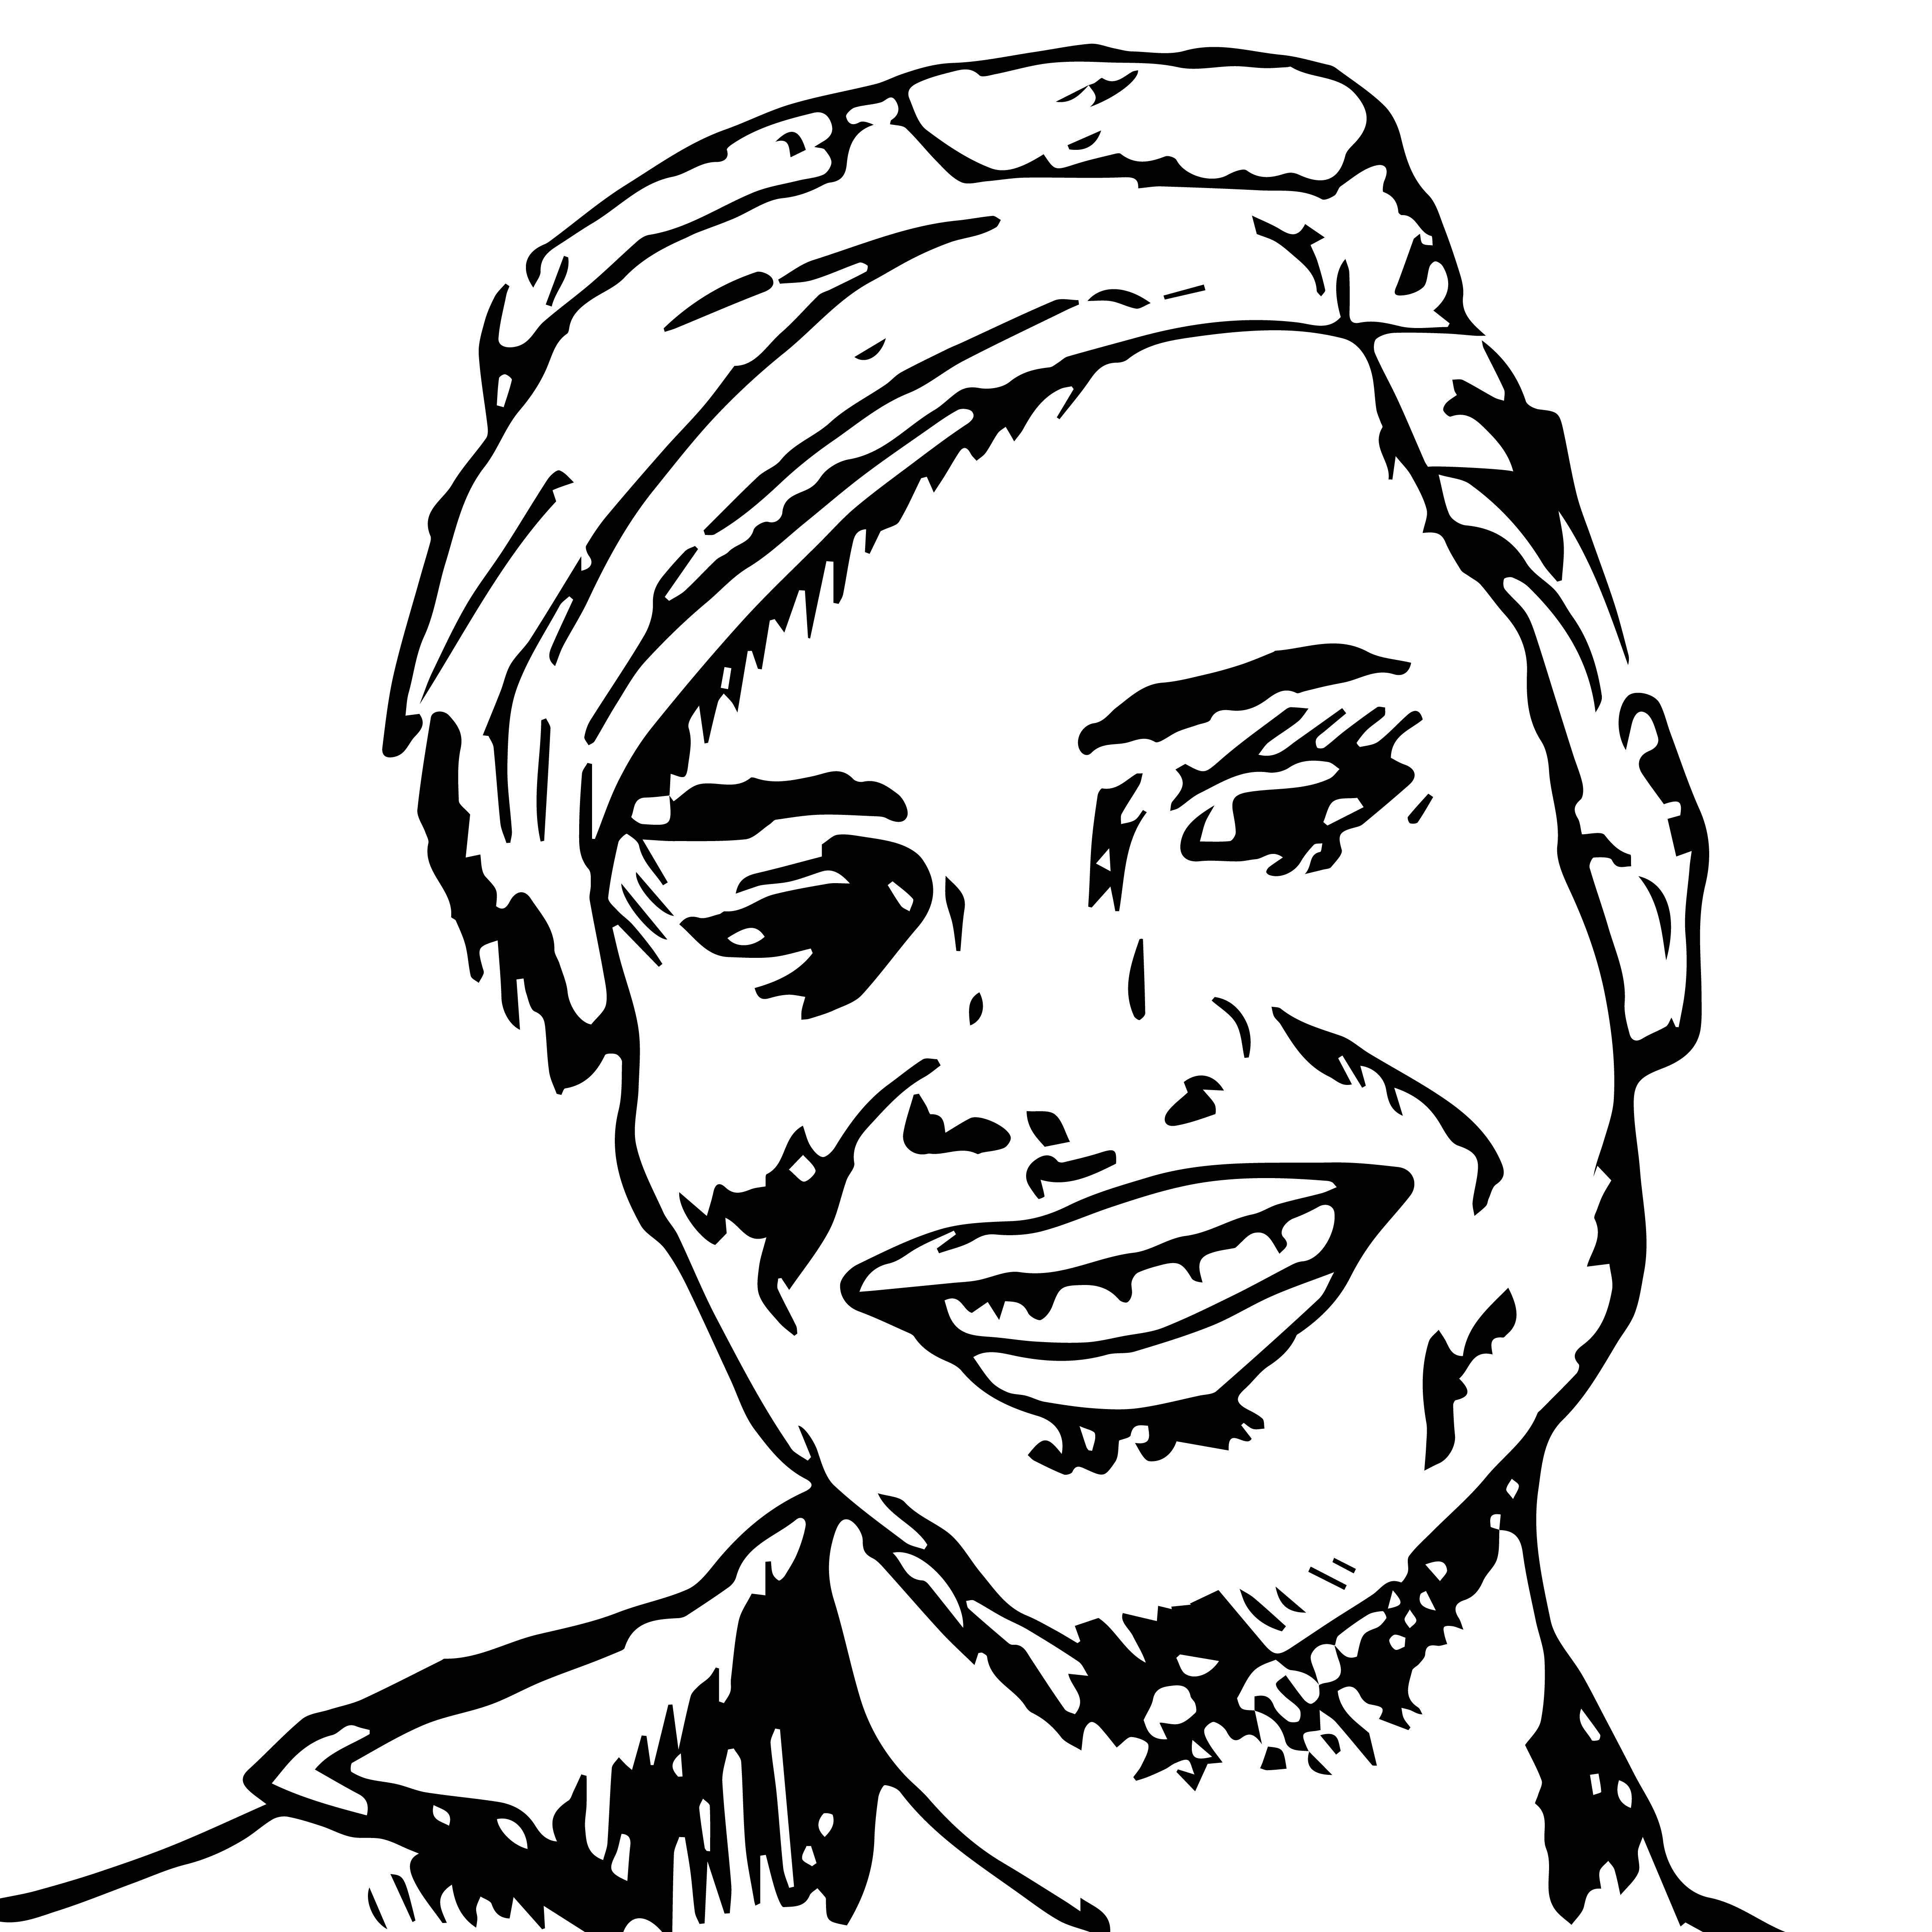 A drawing of a young White man smiling.